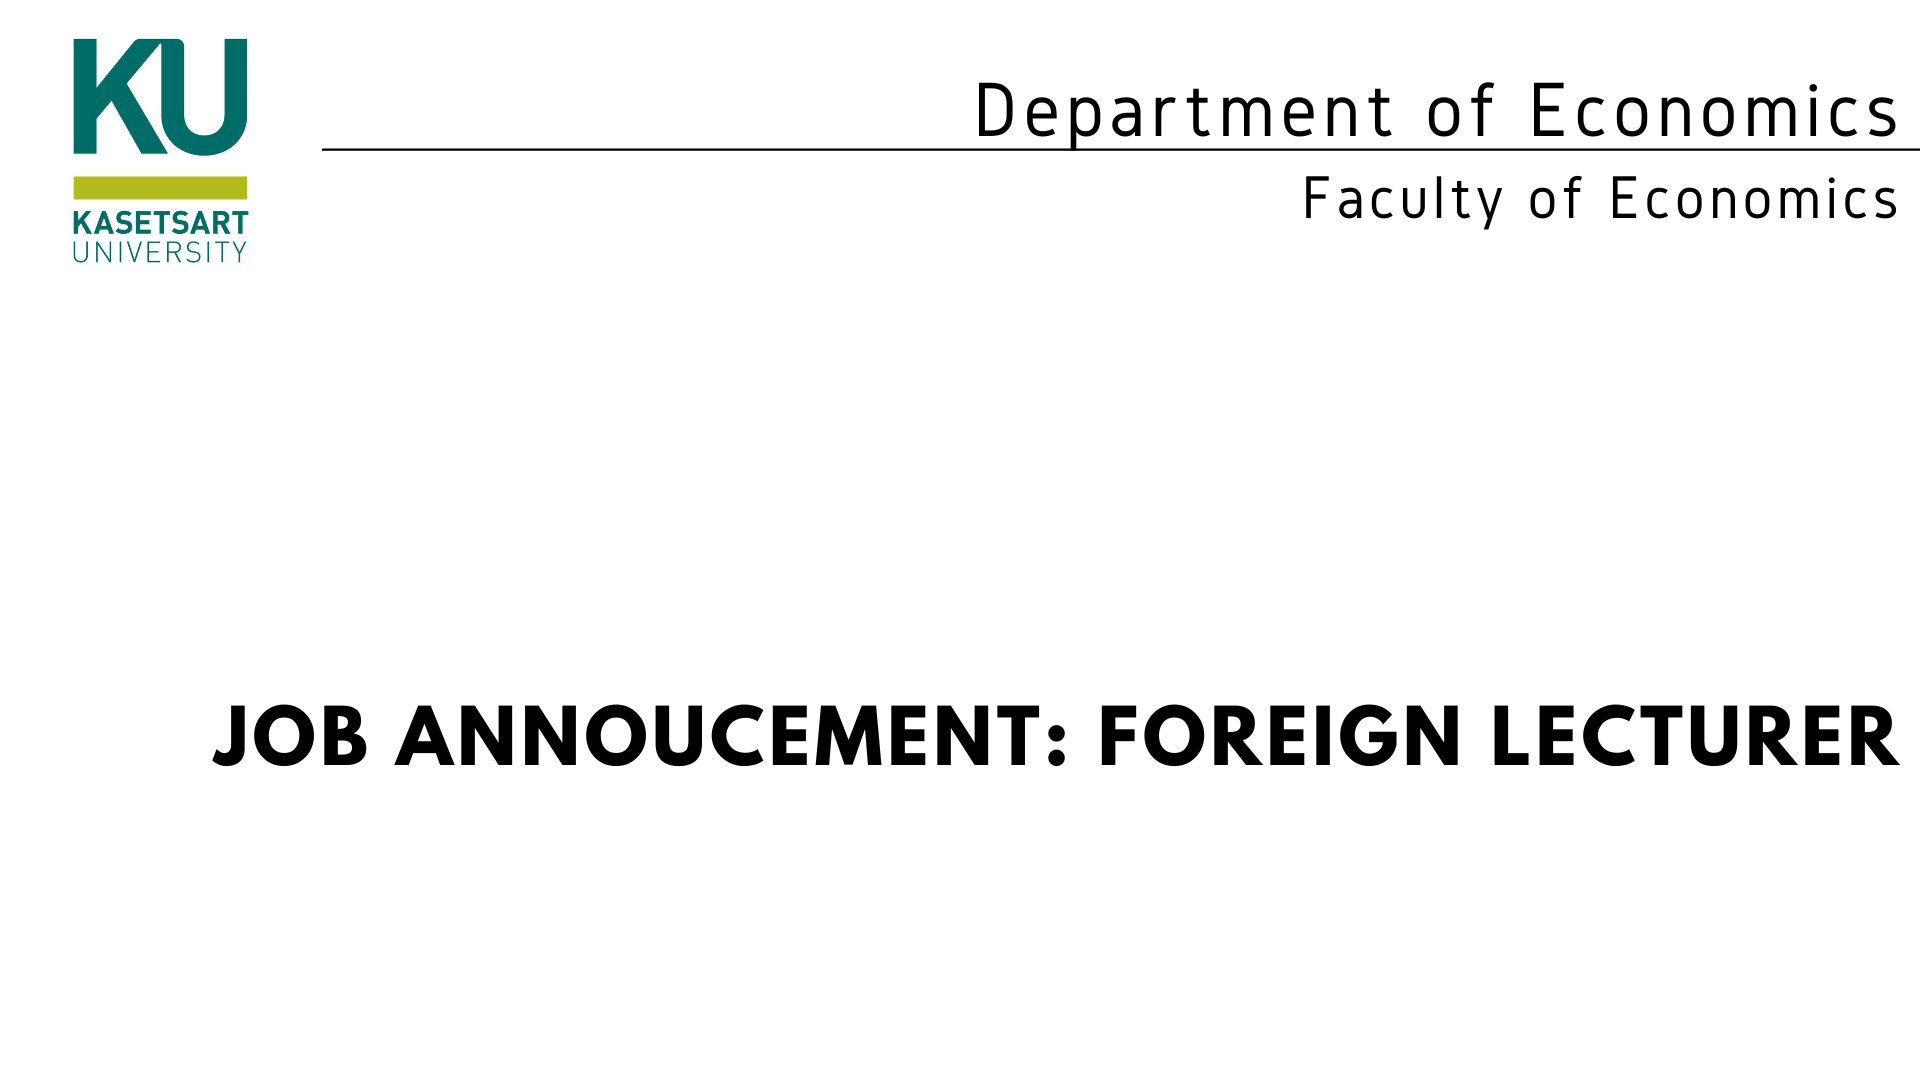 Job Annoucement: Foreign Lecturer from now on until Friday 17 March 2023